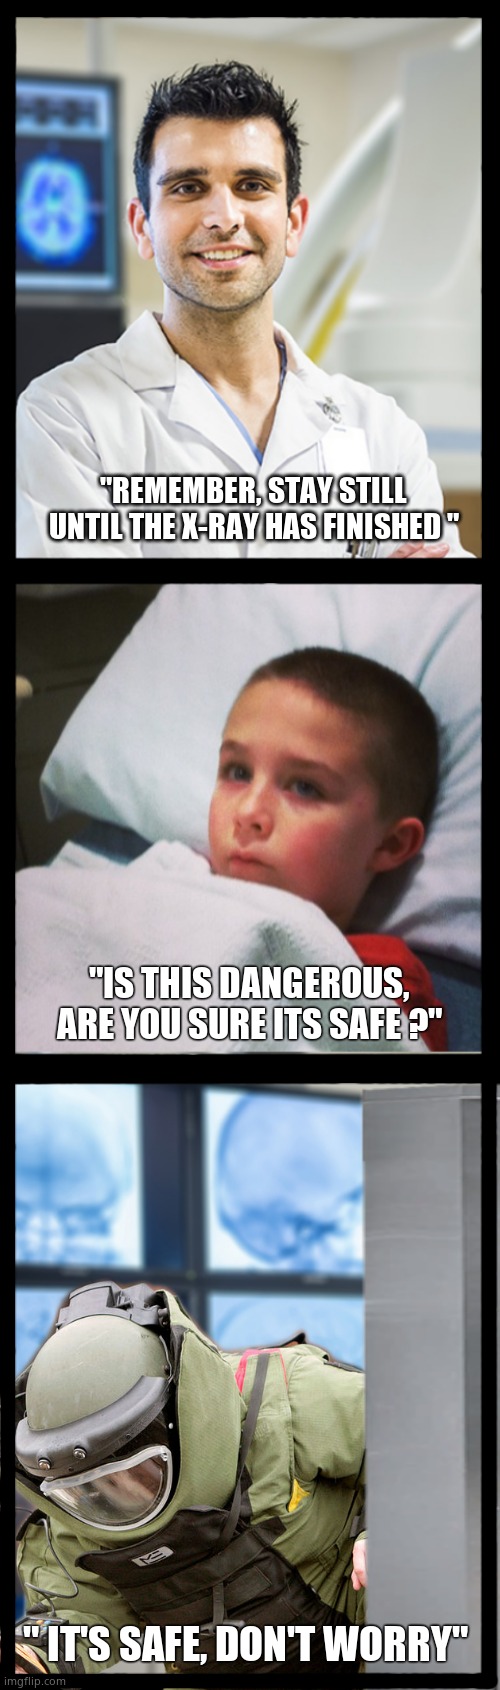 Having an X-ray | "REMEMBER, STAY STILL UNTIL THE X-RAY HAS FINISHED "; "IS THIS DANGEROUS, ARE YOU SURE ITS SAFE ?"; " IT'S SAFE, DON'T WORRY" | image tagged in memes,funny,healthcare,x-ray,radiation,fun | made w/ Imgflip meme maker